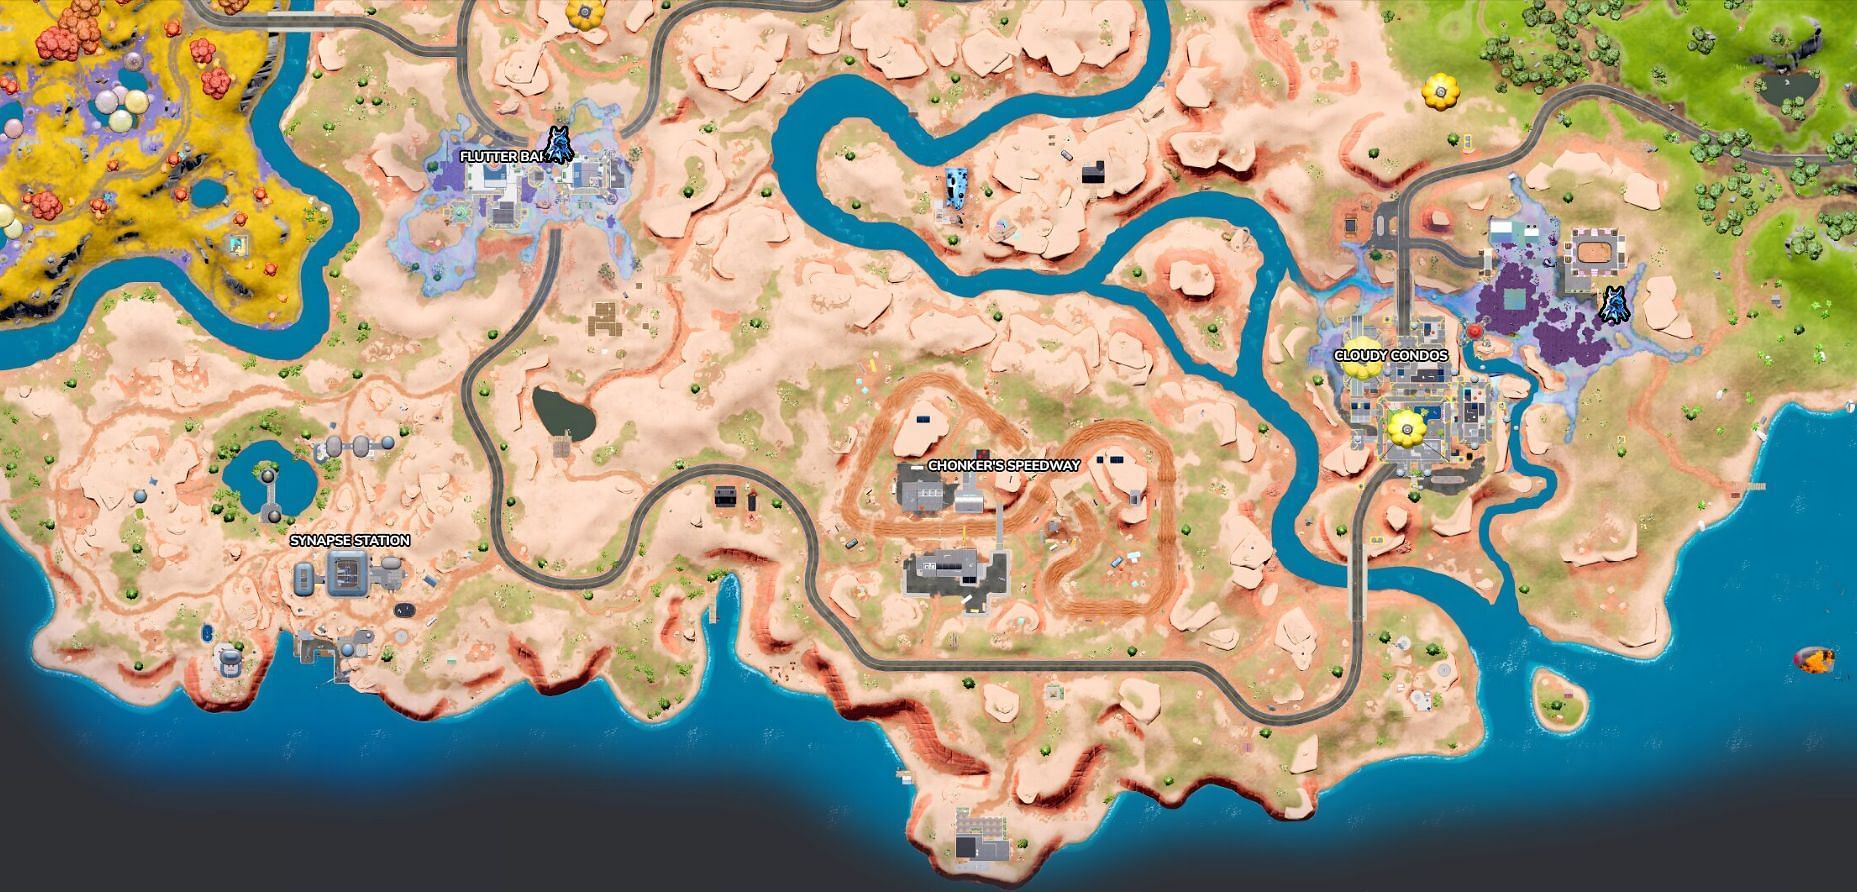 Alteration Altar locations in dsert biome (Image via Fortnite.GG)